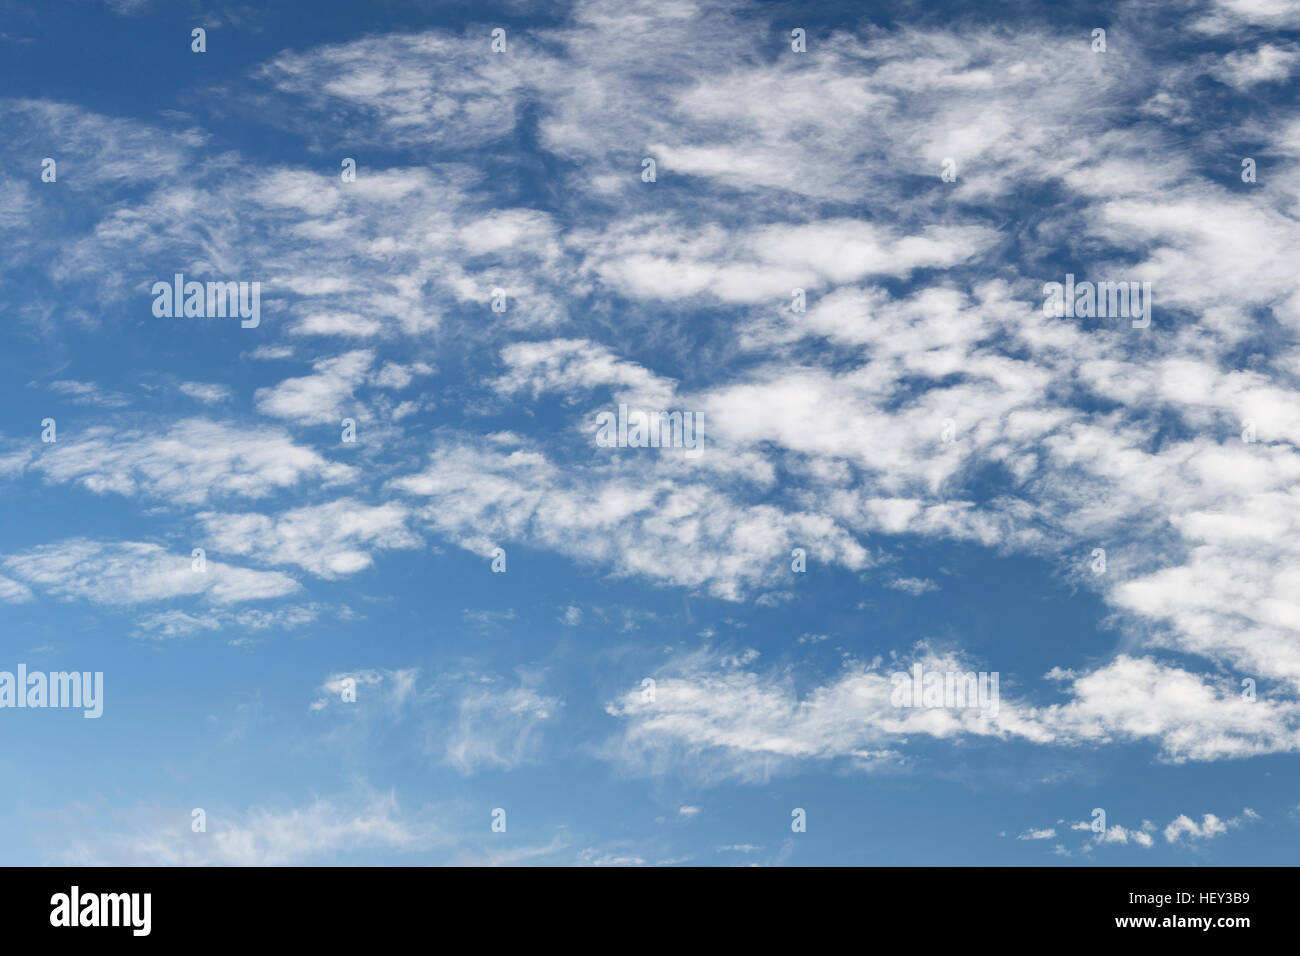 Fluffy white Altocumulus clouds against a blue sky. Stock Photo